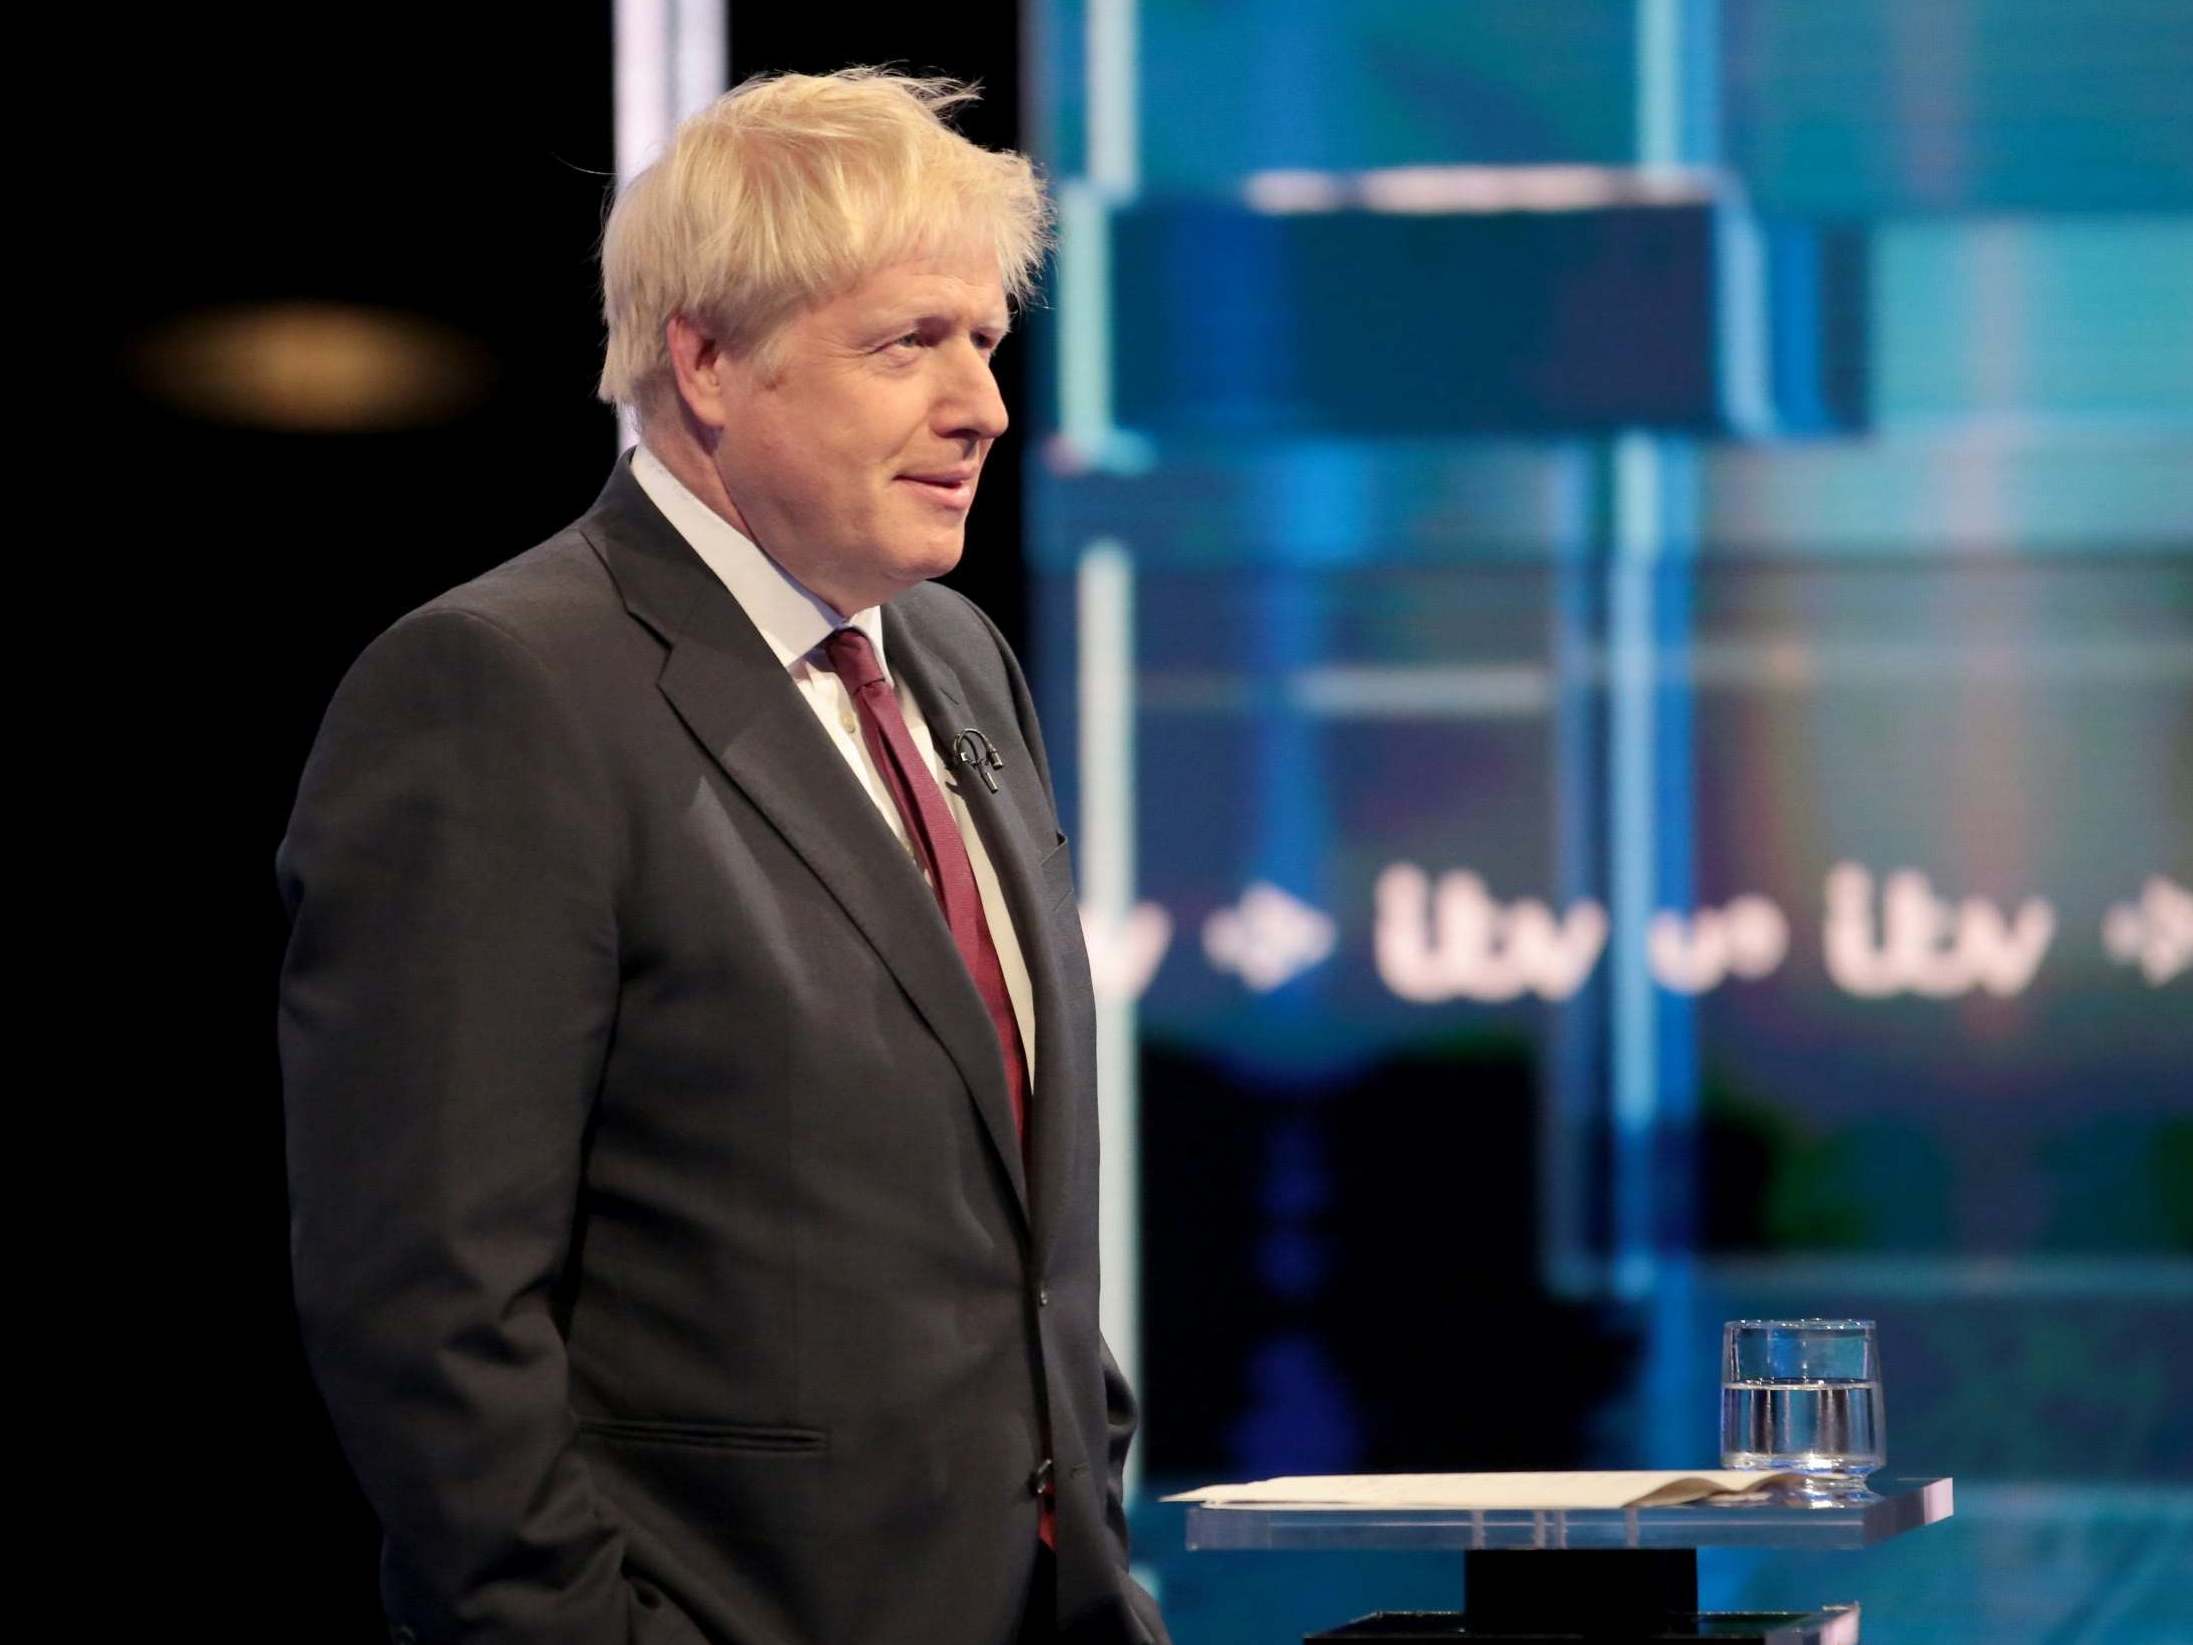 Hunt won the TV battle but the war was already lost – Boris Johnson will now be our bored Brexit PM